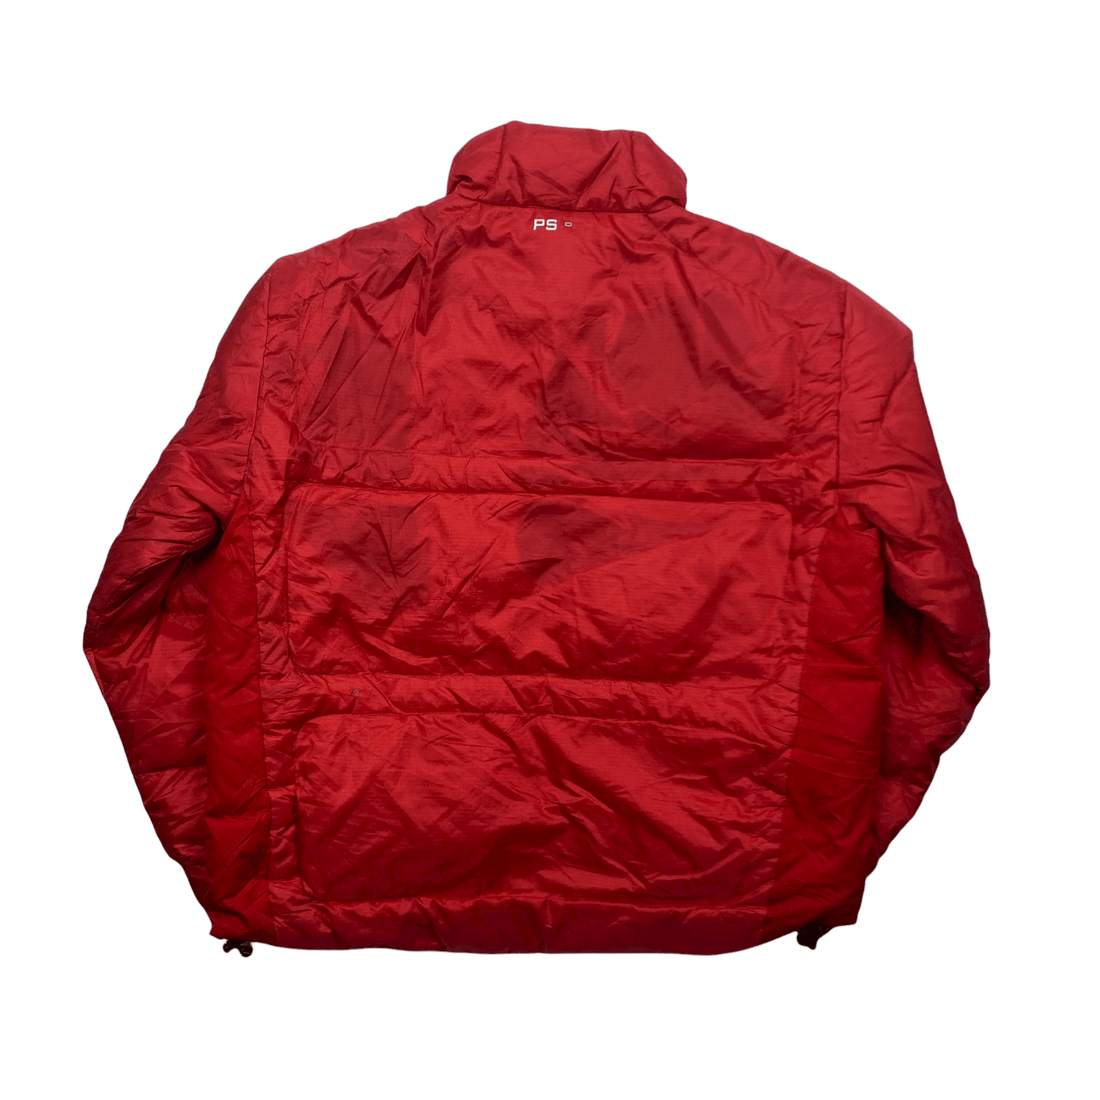 Vintage 90s Red Polo Sport Spell-Out Puffer Coat/ Jacket - Extra Large - The Streetwear Studio